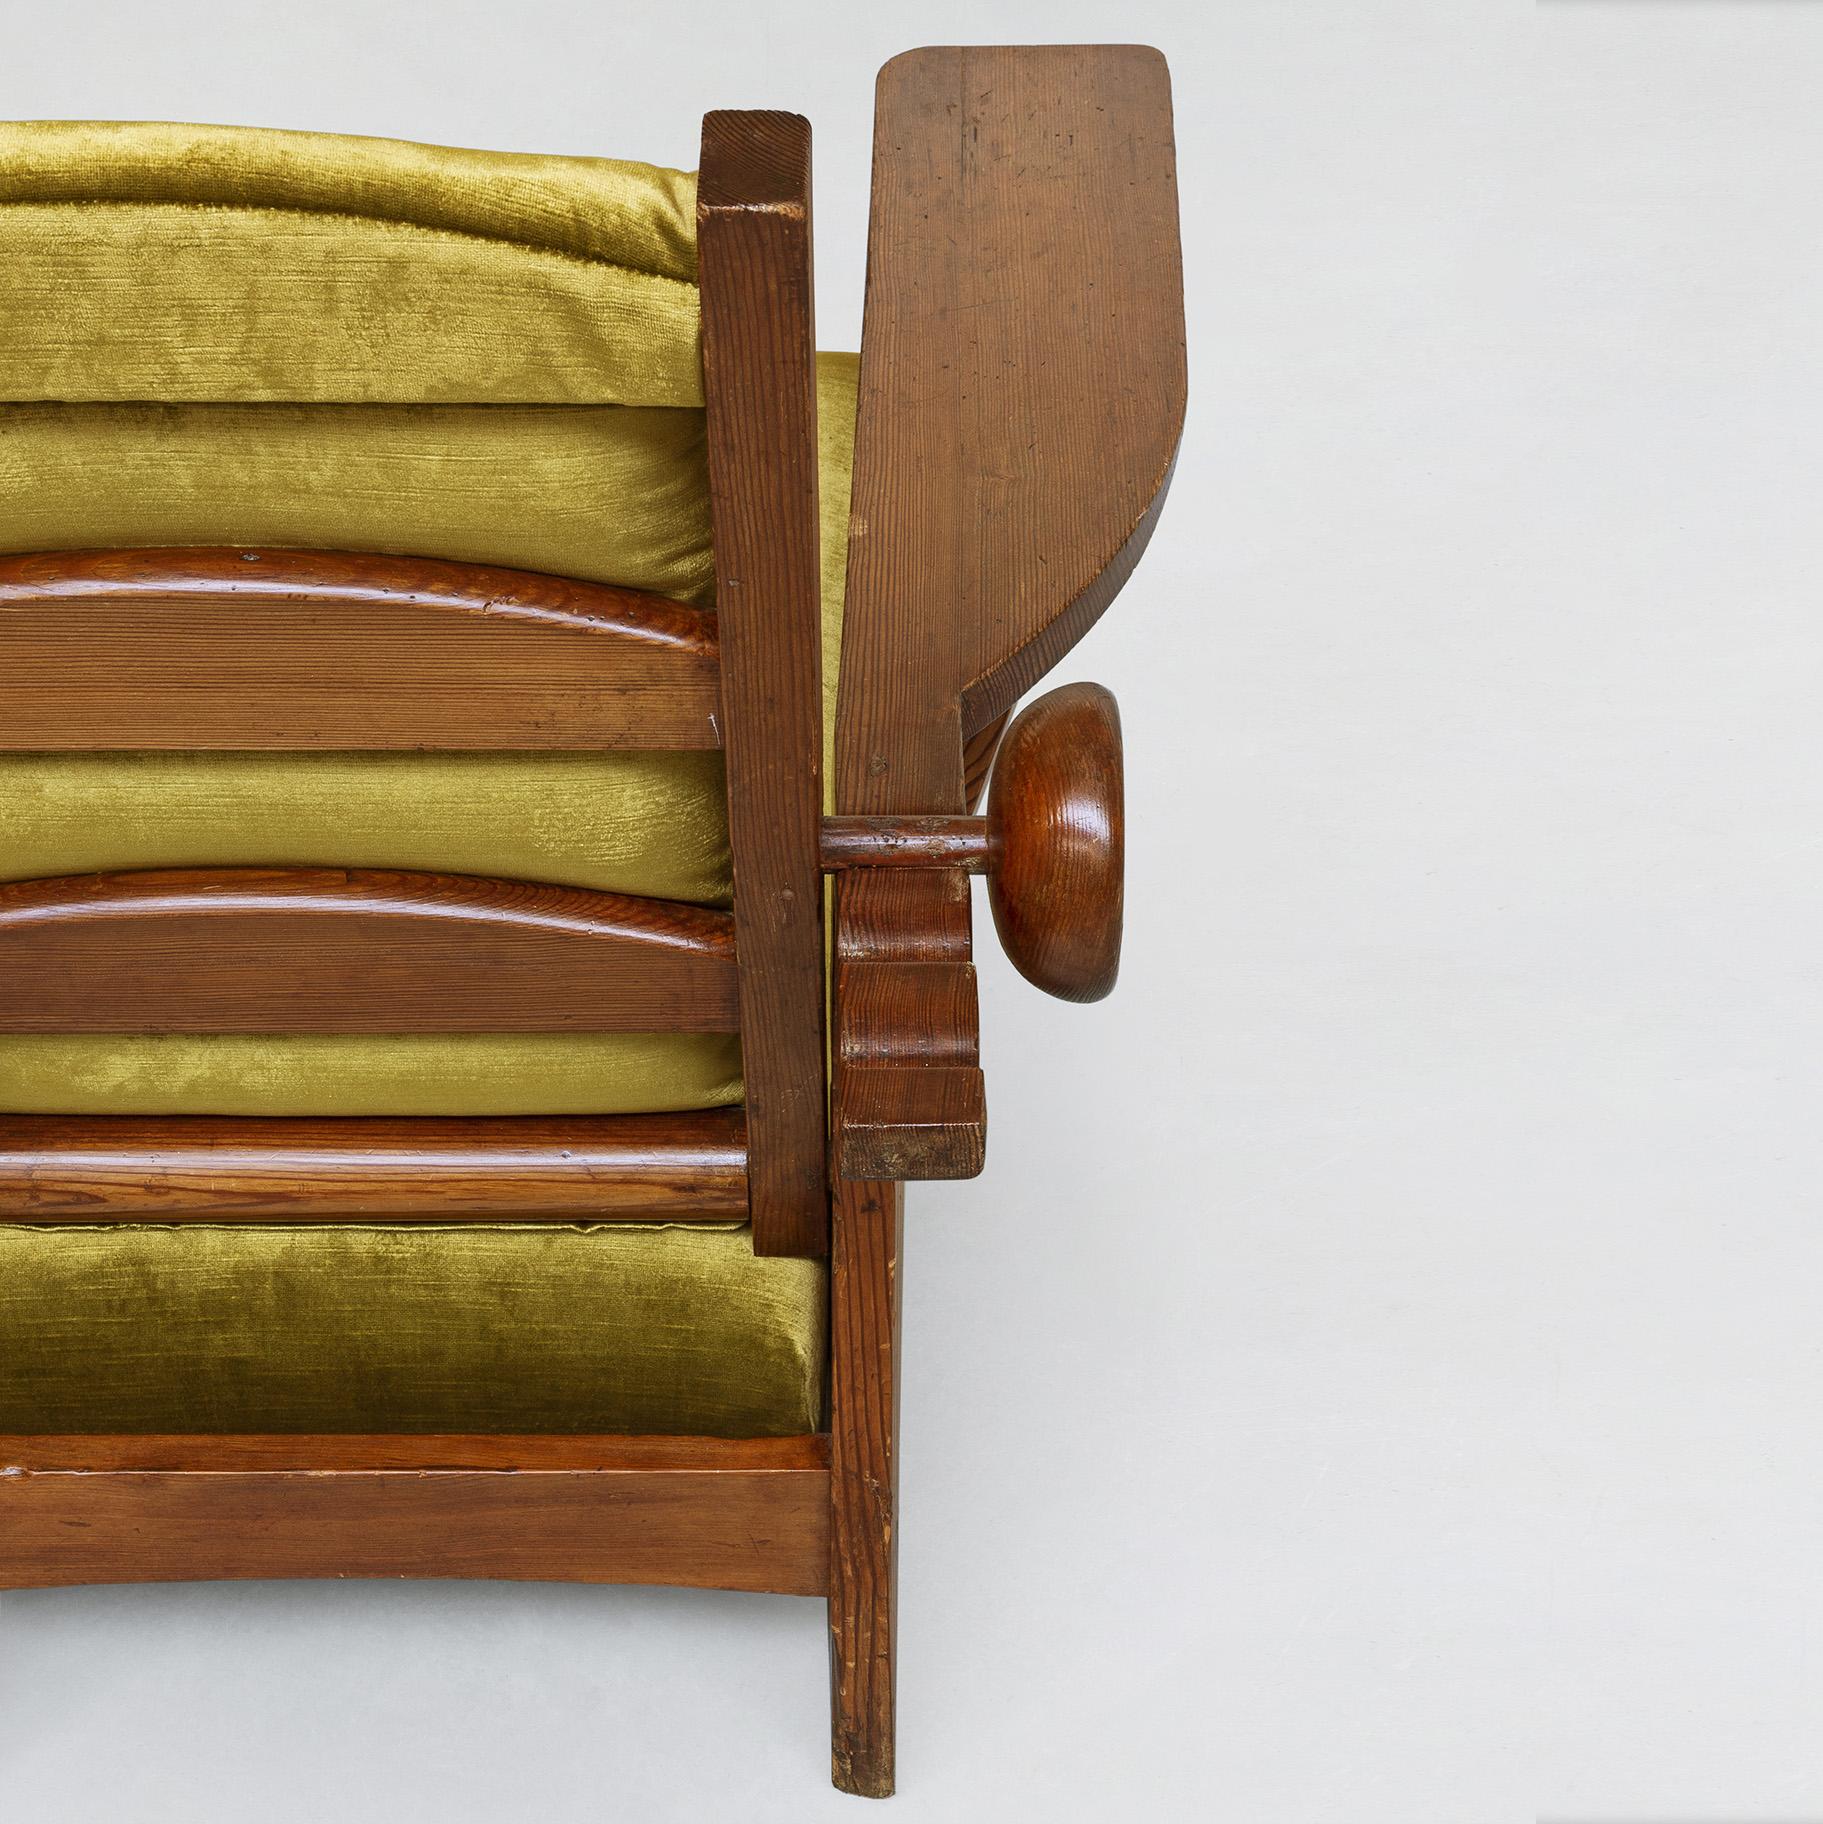 Golden Green Velvet Adjustable Armchairs in Pitch Pine Clemens Holzmeister, 1930 For Sale 6